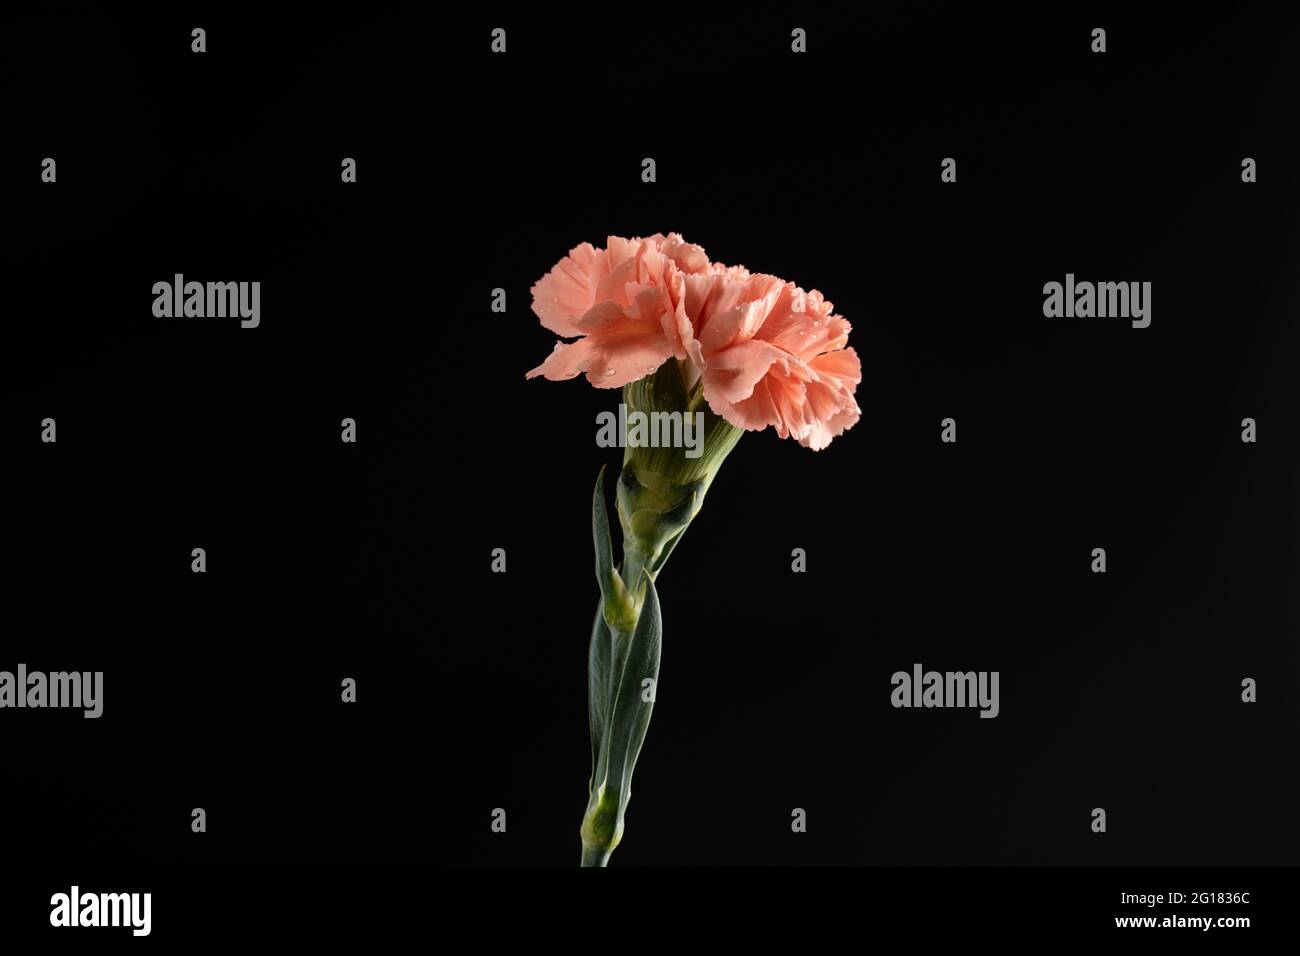 A pink carnation against a black background Stock Photo